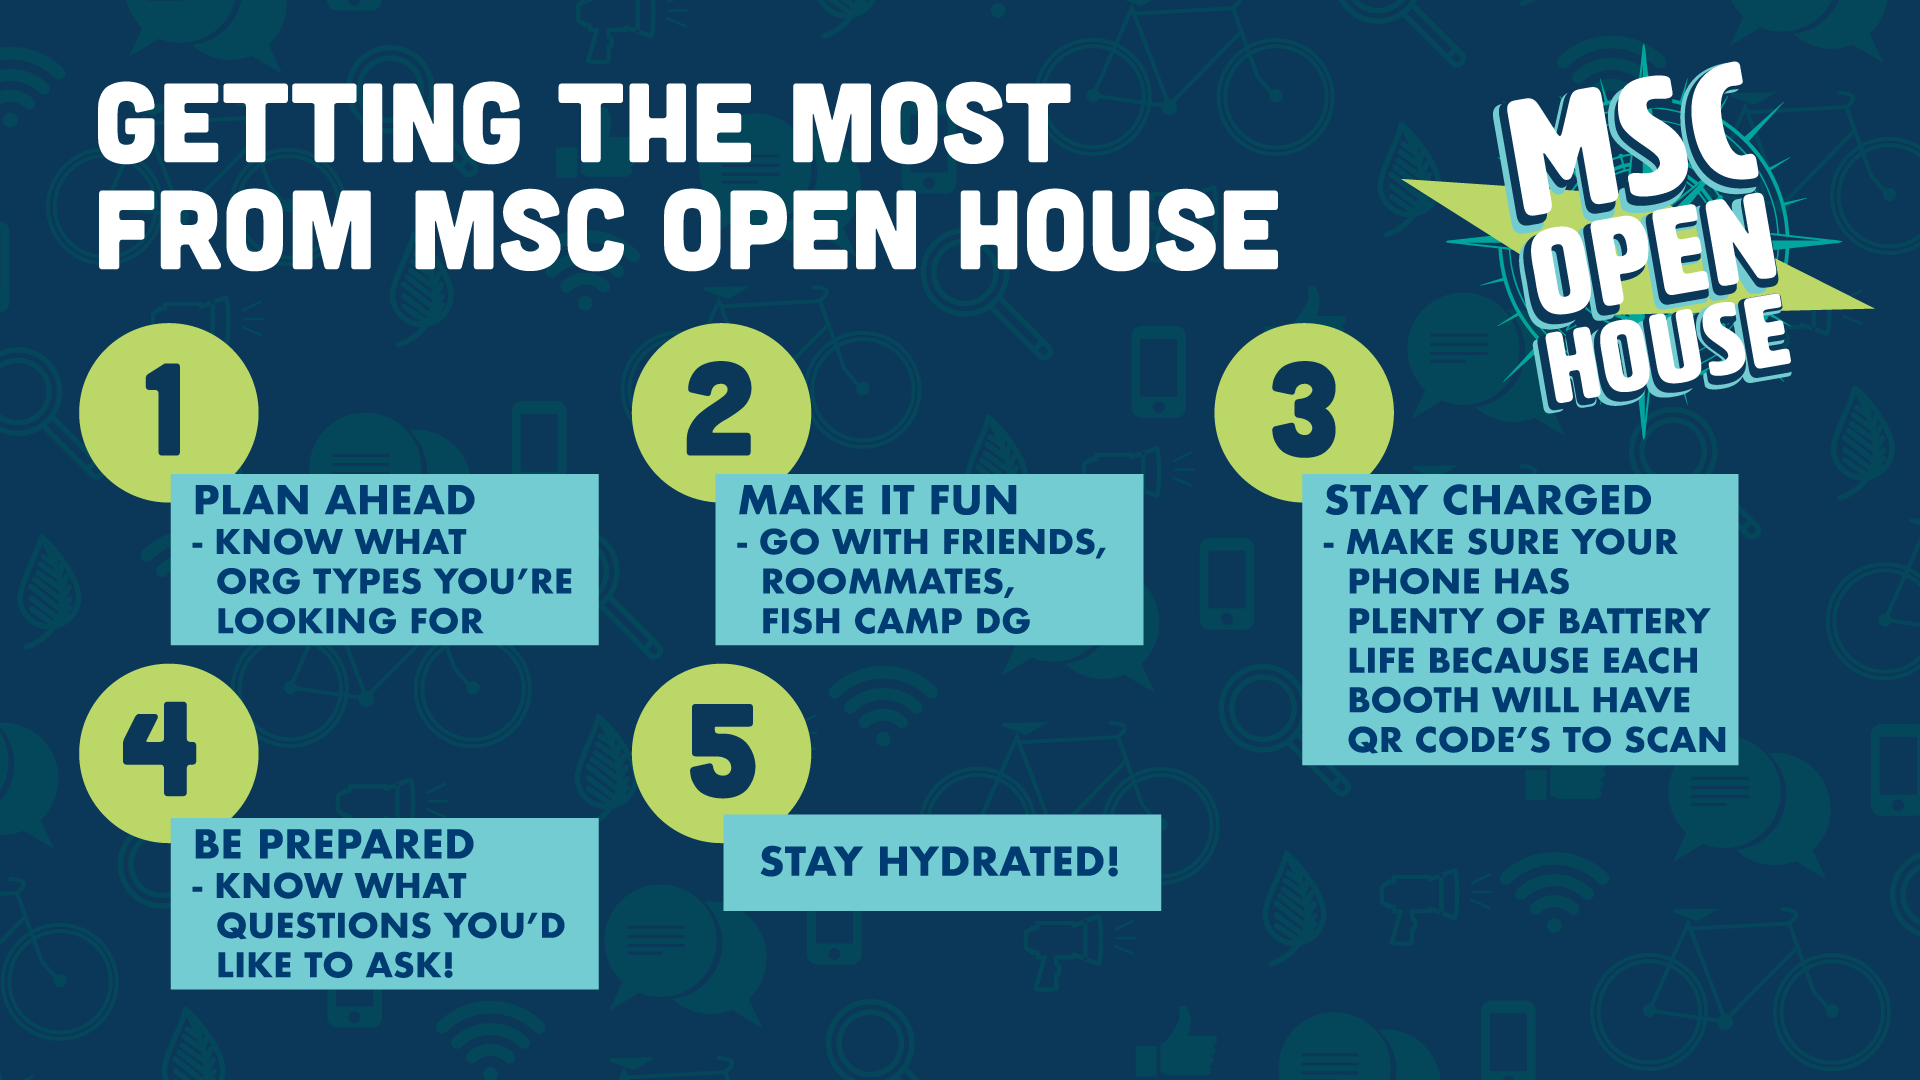 Getting the most from MSC Open House: 1: Plan ahead, know org types you are looking for. 2: Make it fun, go with friends, roommates, Fish Camp DG. 3: Stay Charged, make sure your phone has plenty of battery life because each booth will have QR Code's to scan. 4: Be prepared, know what questions you'd like to ask! 5: Stay Hydrated.